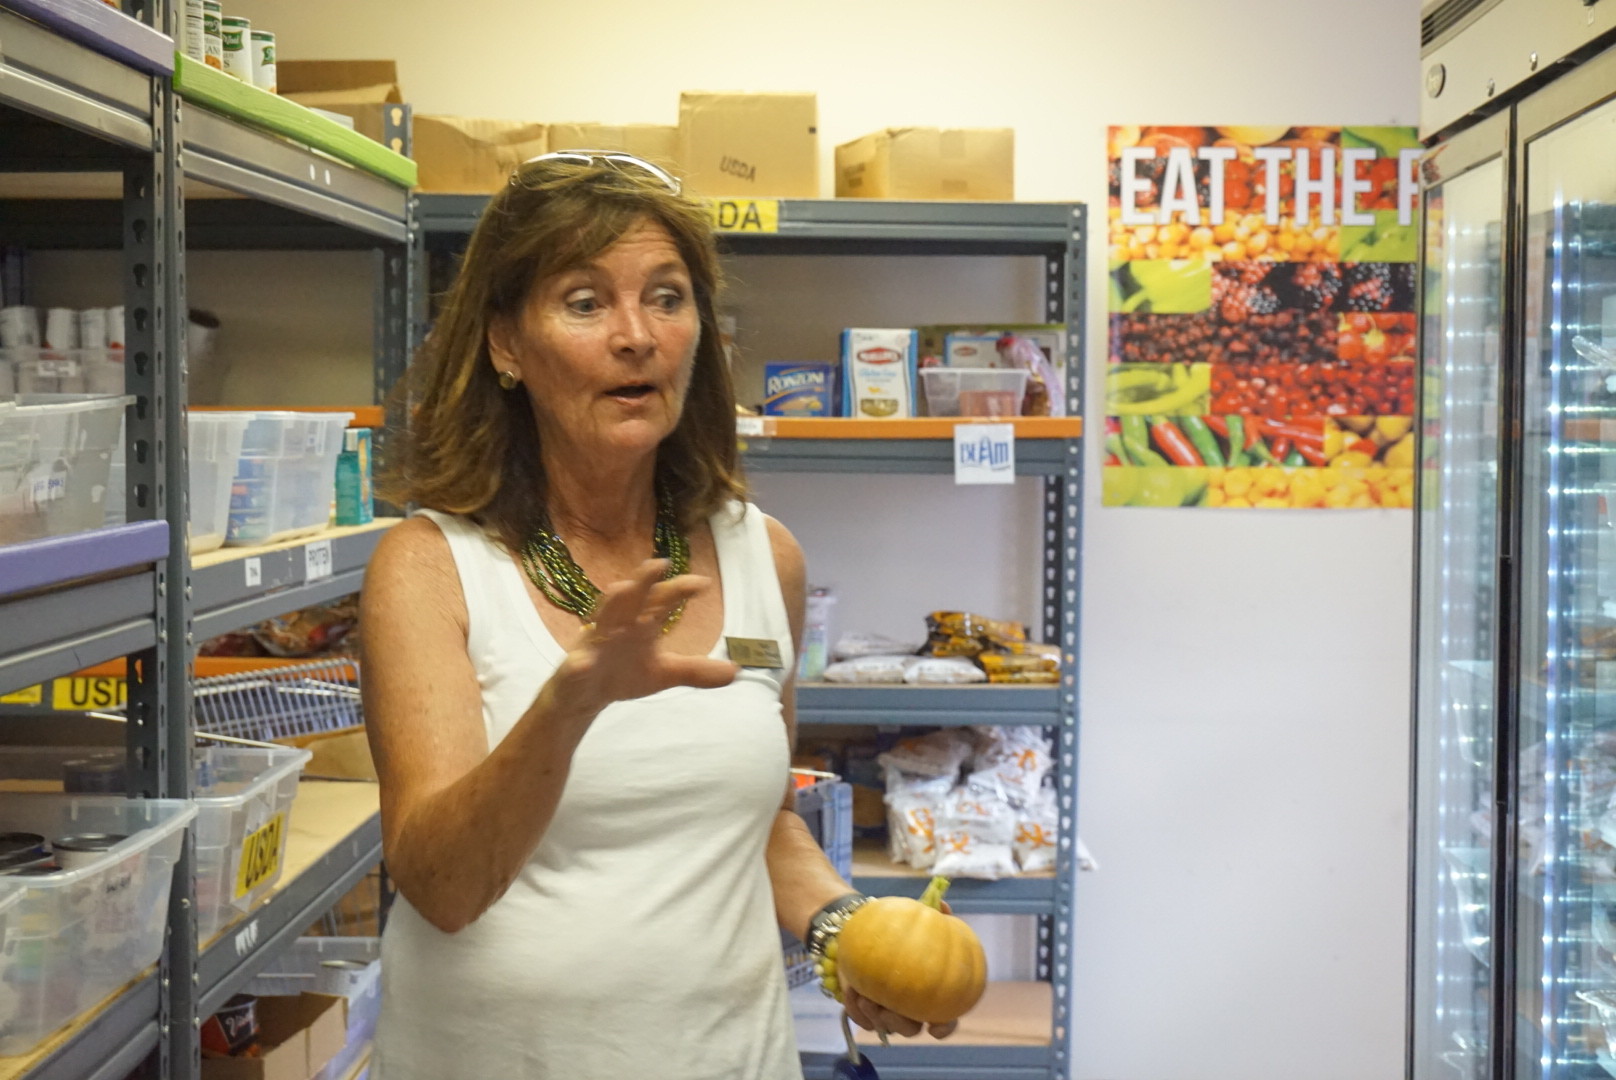 Mary Ellen Waugh explains the food pantry's offerings